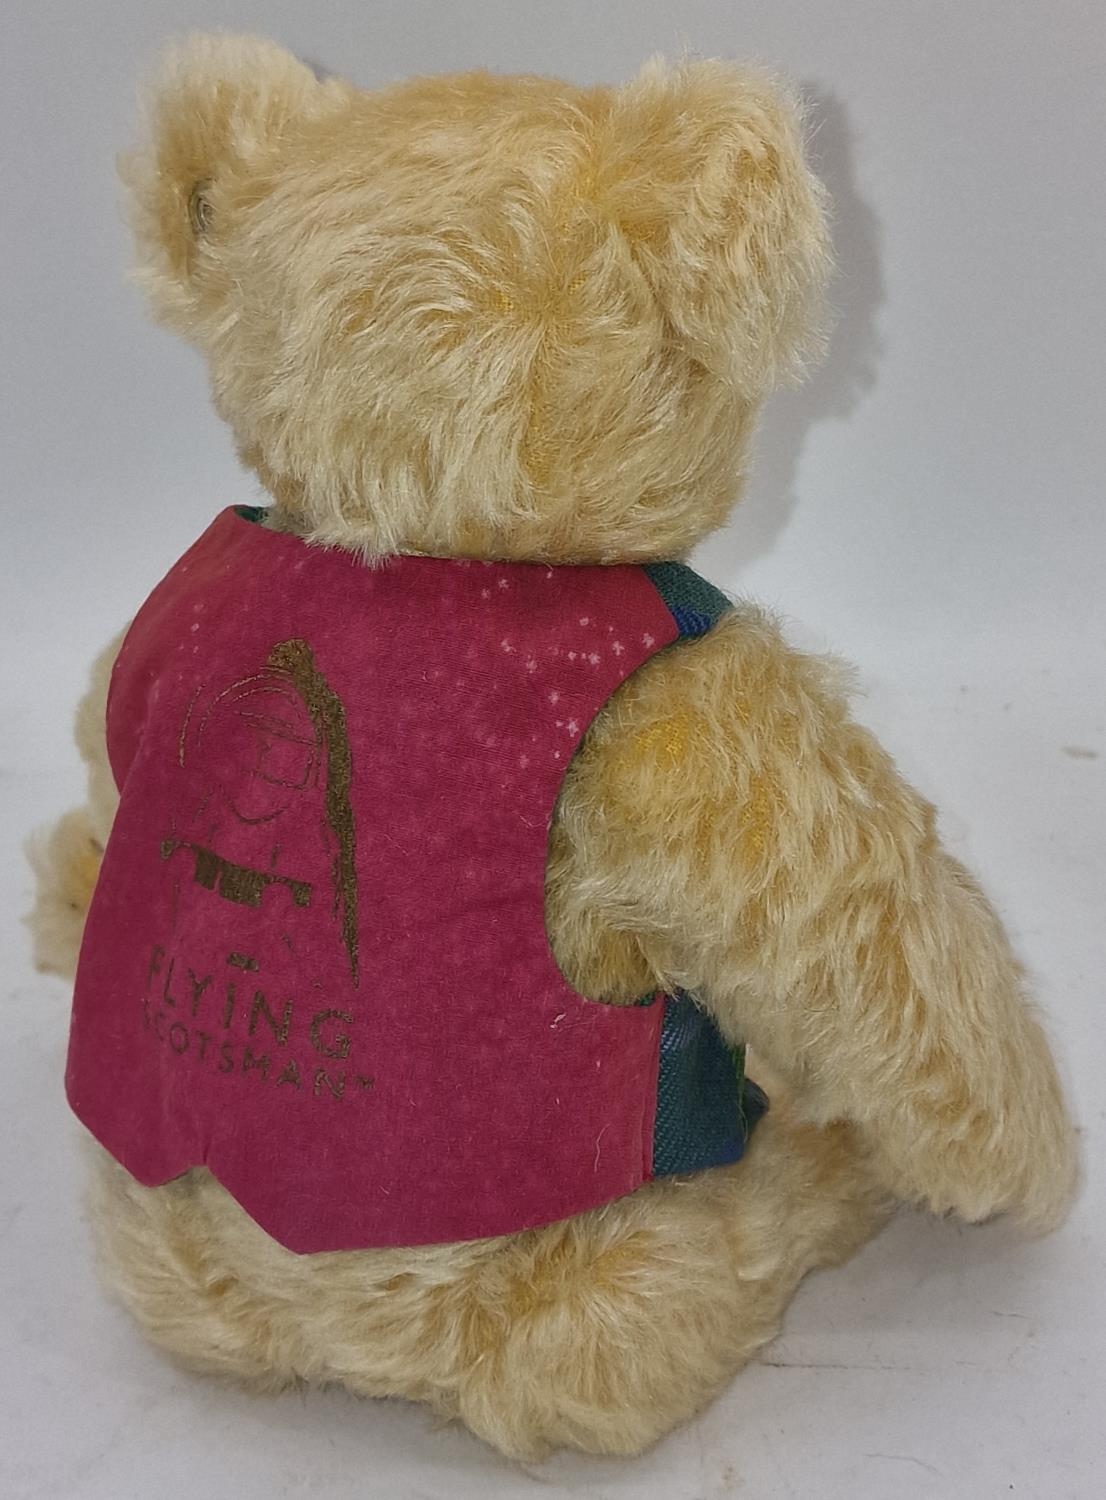 Steiff Danbury Mint Flying Scotsman teddy bear boxed with certificate. - Image 3 of 4